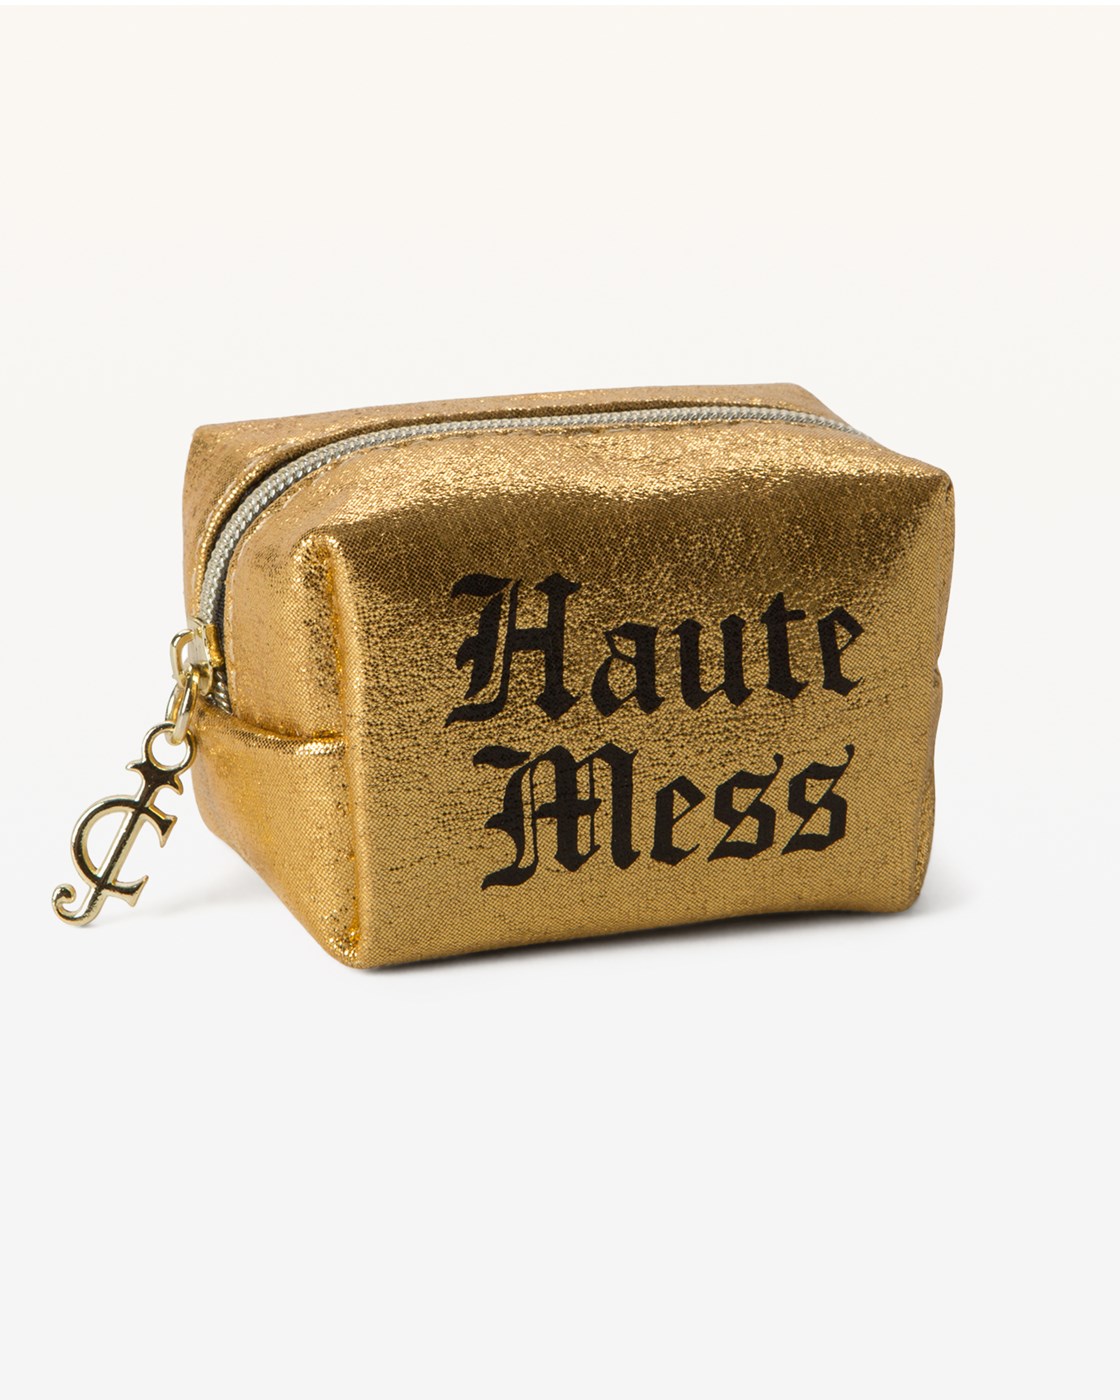 Juicy Couture Haute Mess Emergency Kit